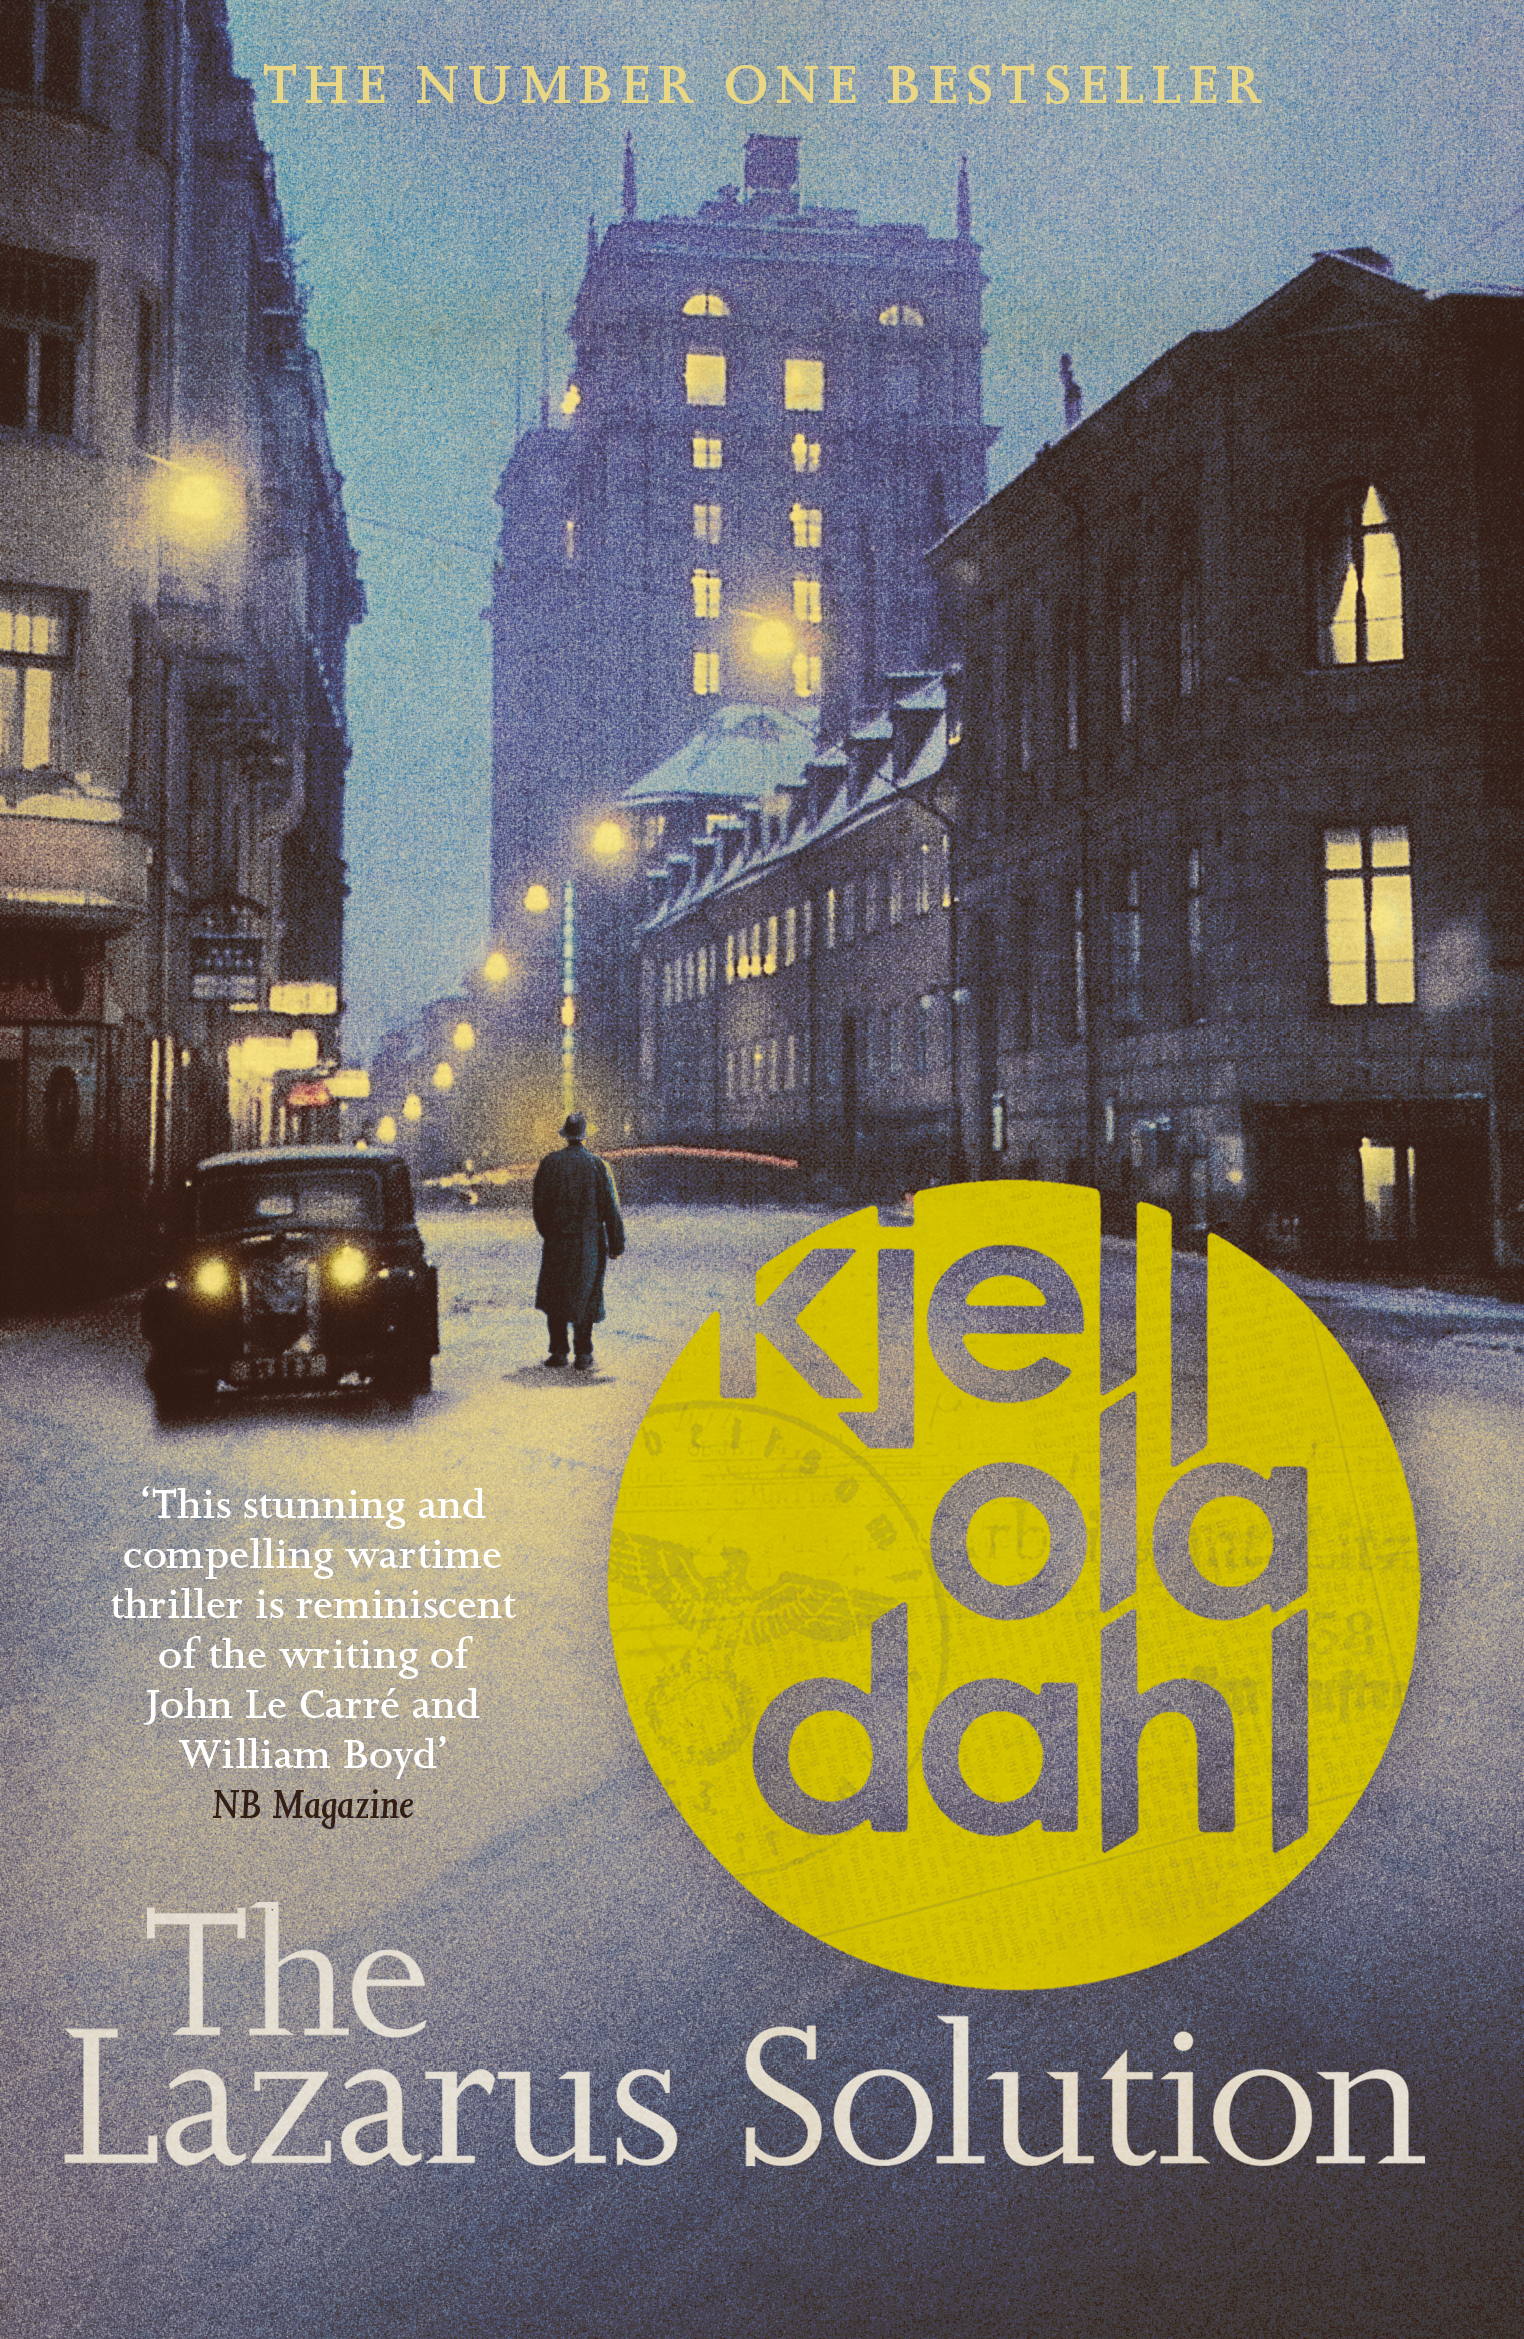 The book cover of Kjell Ola Dahl's The Lazarus Solution